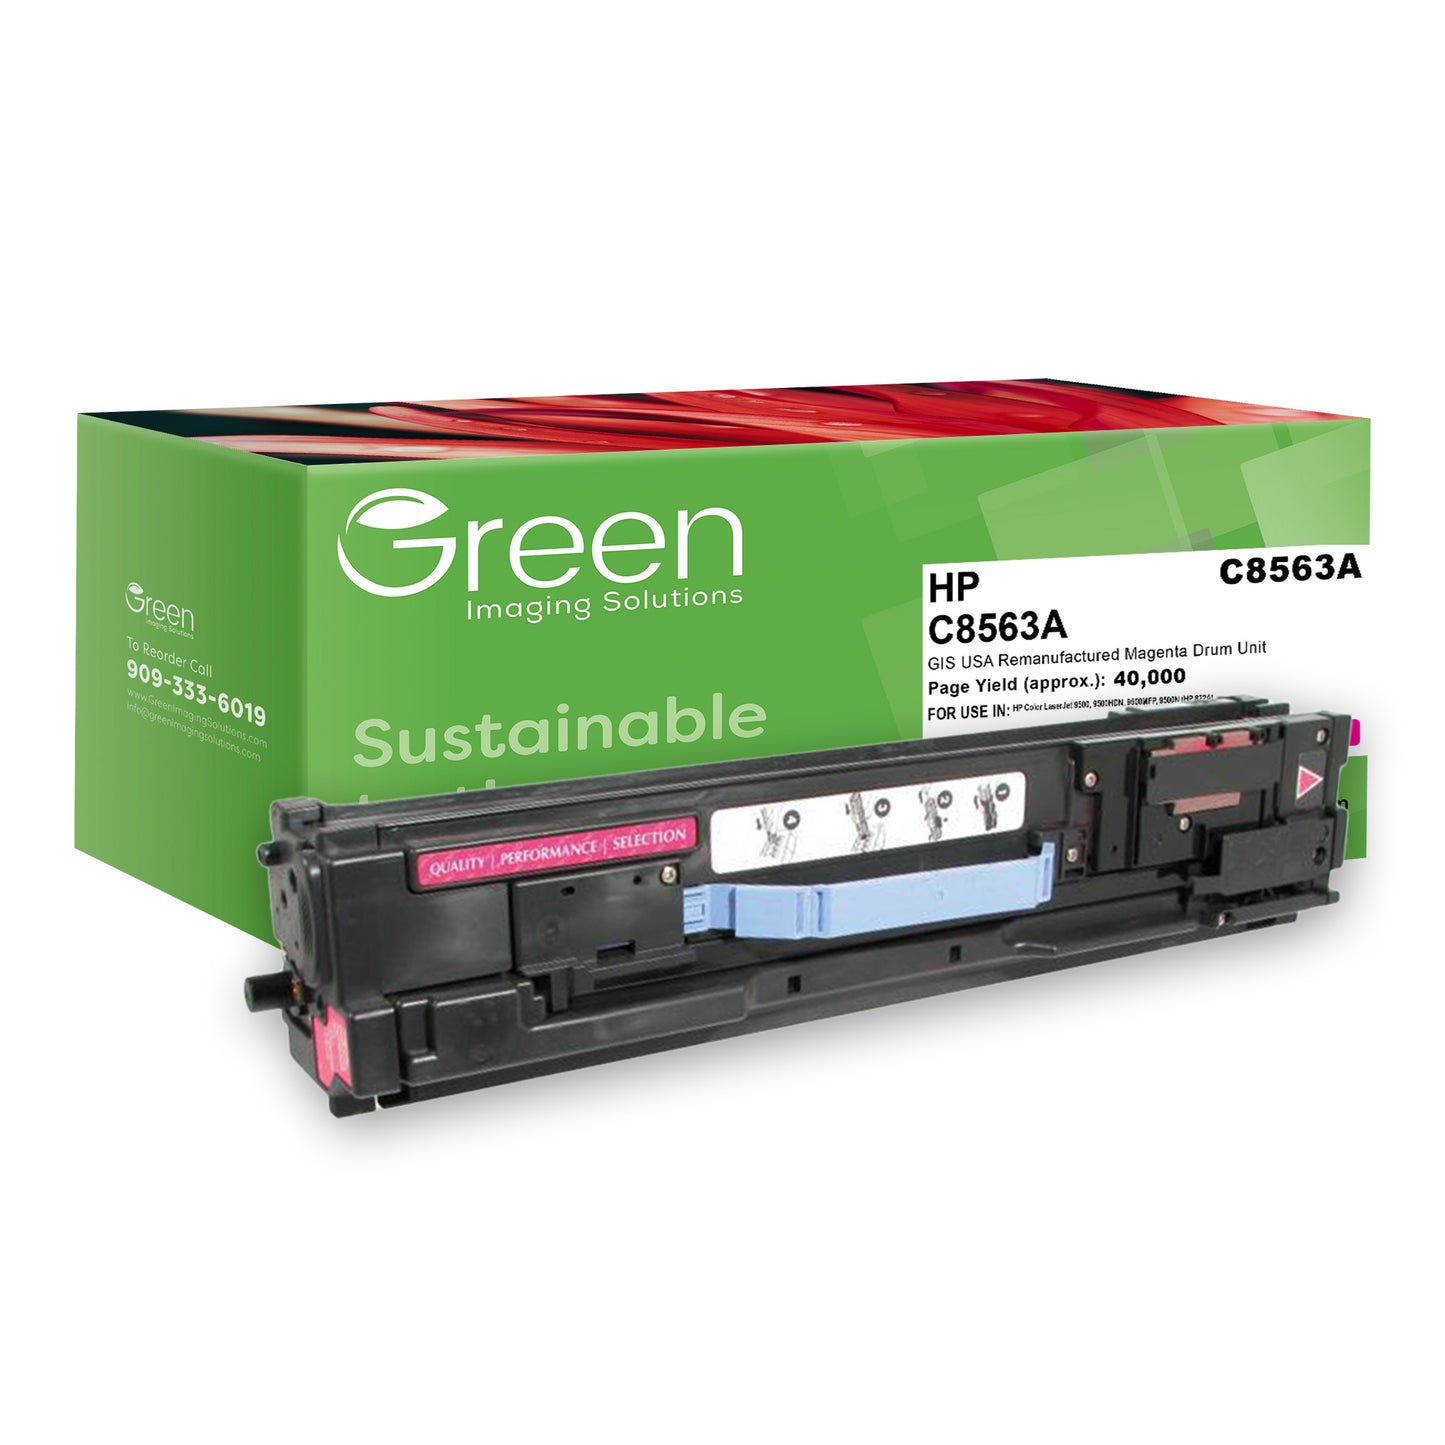 Green Imaging Solutions USA Remanufactured Magenta Drum Unit for HP 822A (C8563A)